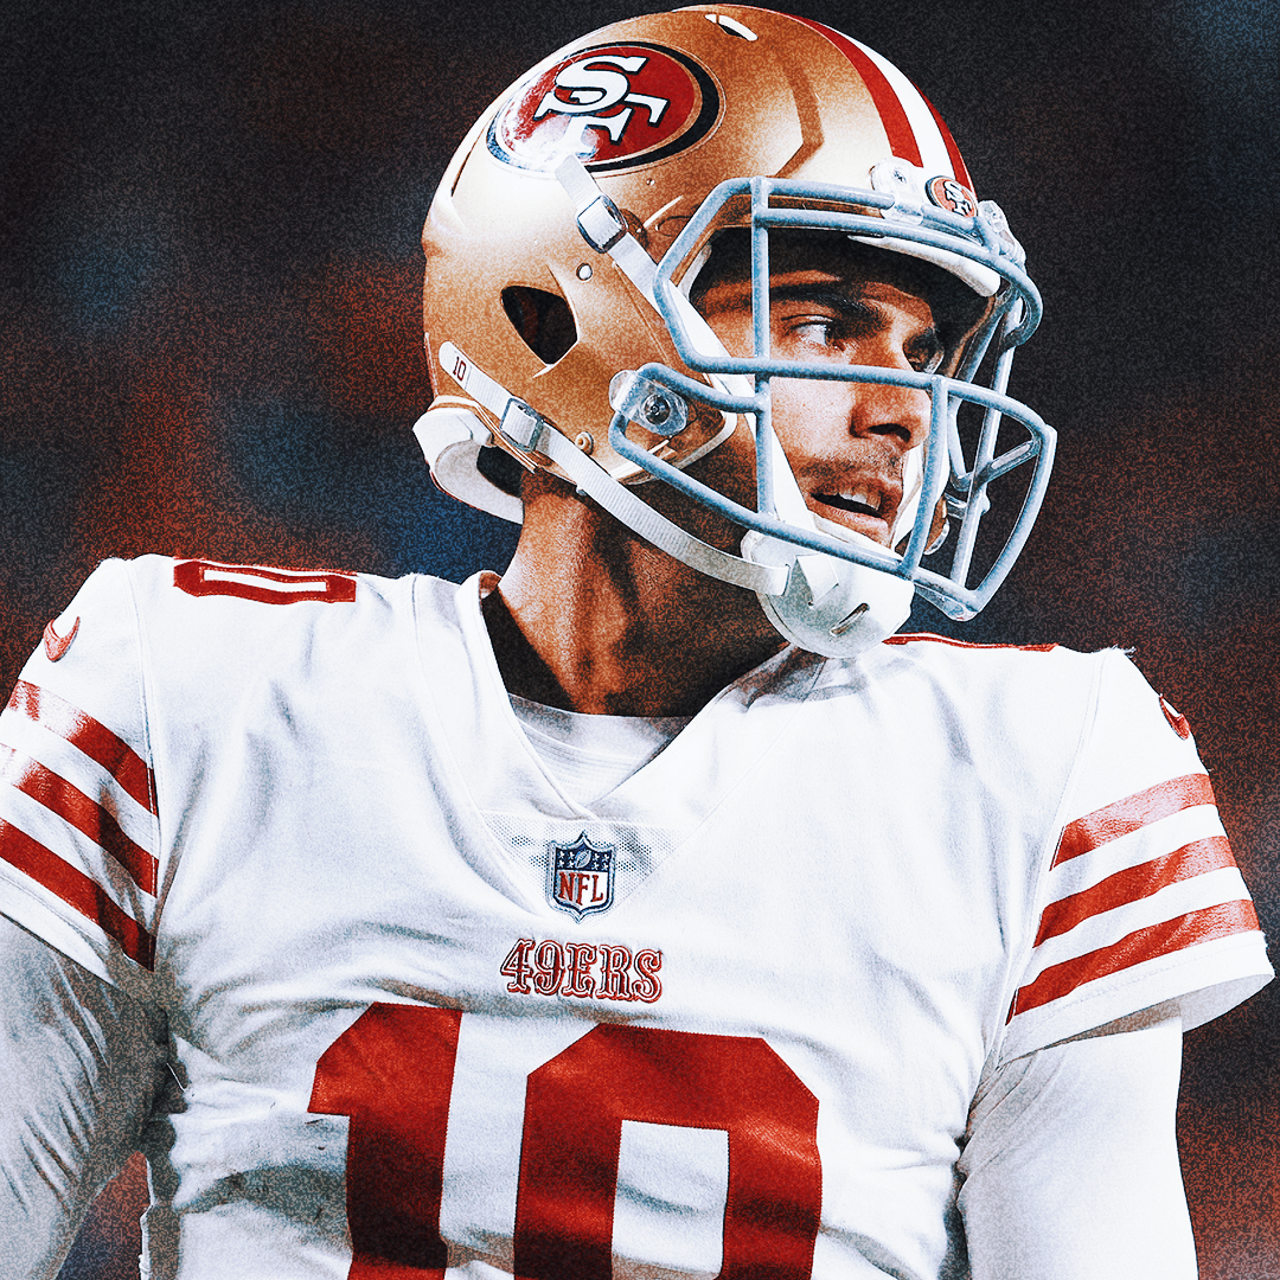 Jimmy Garoppolo Named NFC Offensive Player of the Week